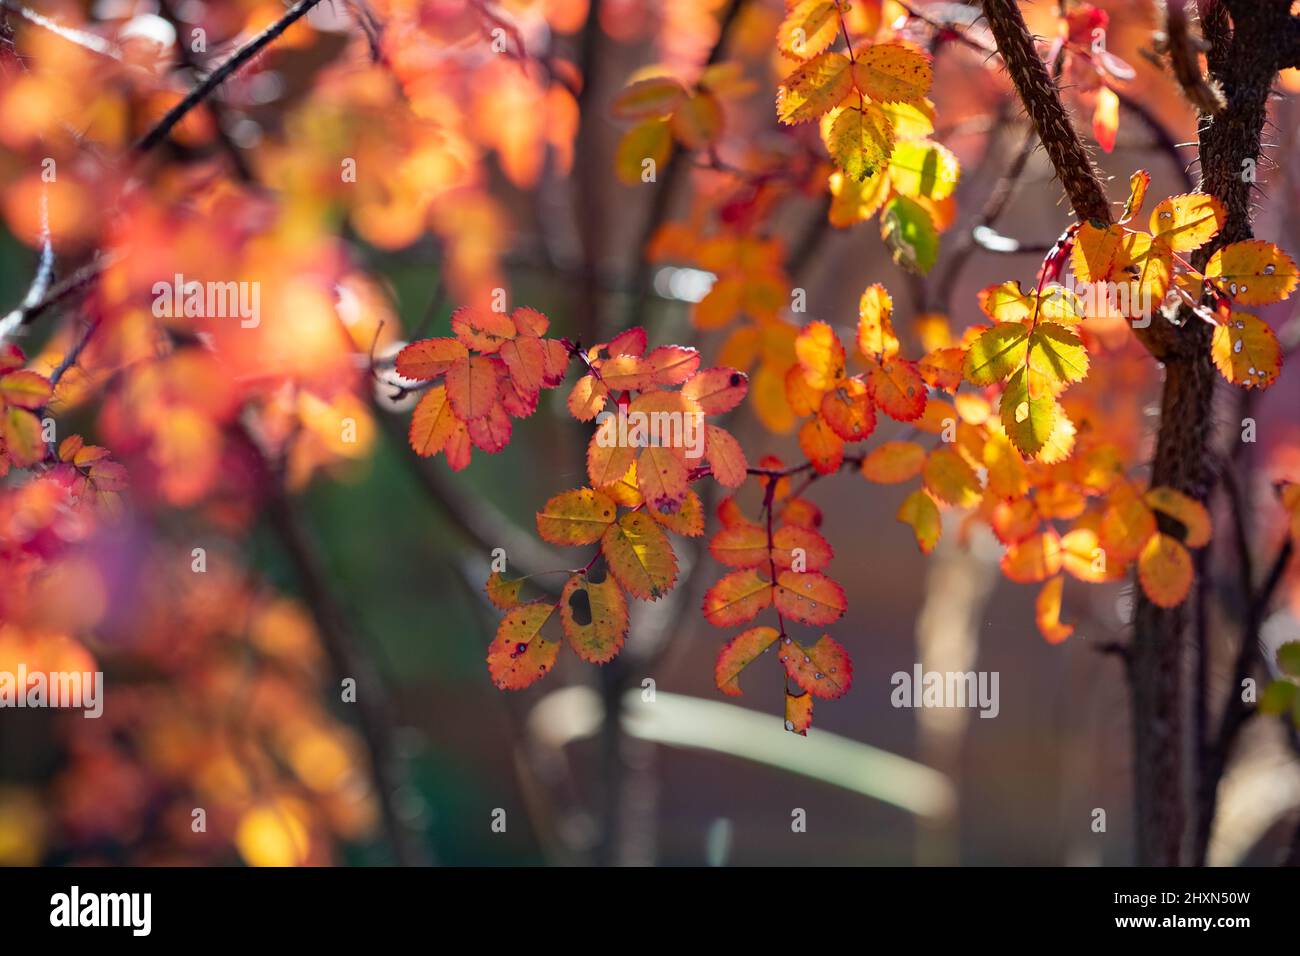 Bright colorful leaves on bushes in autumn, selective focus Stock Photo